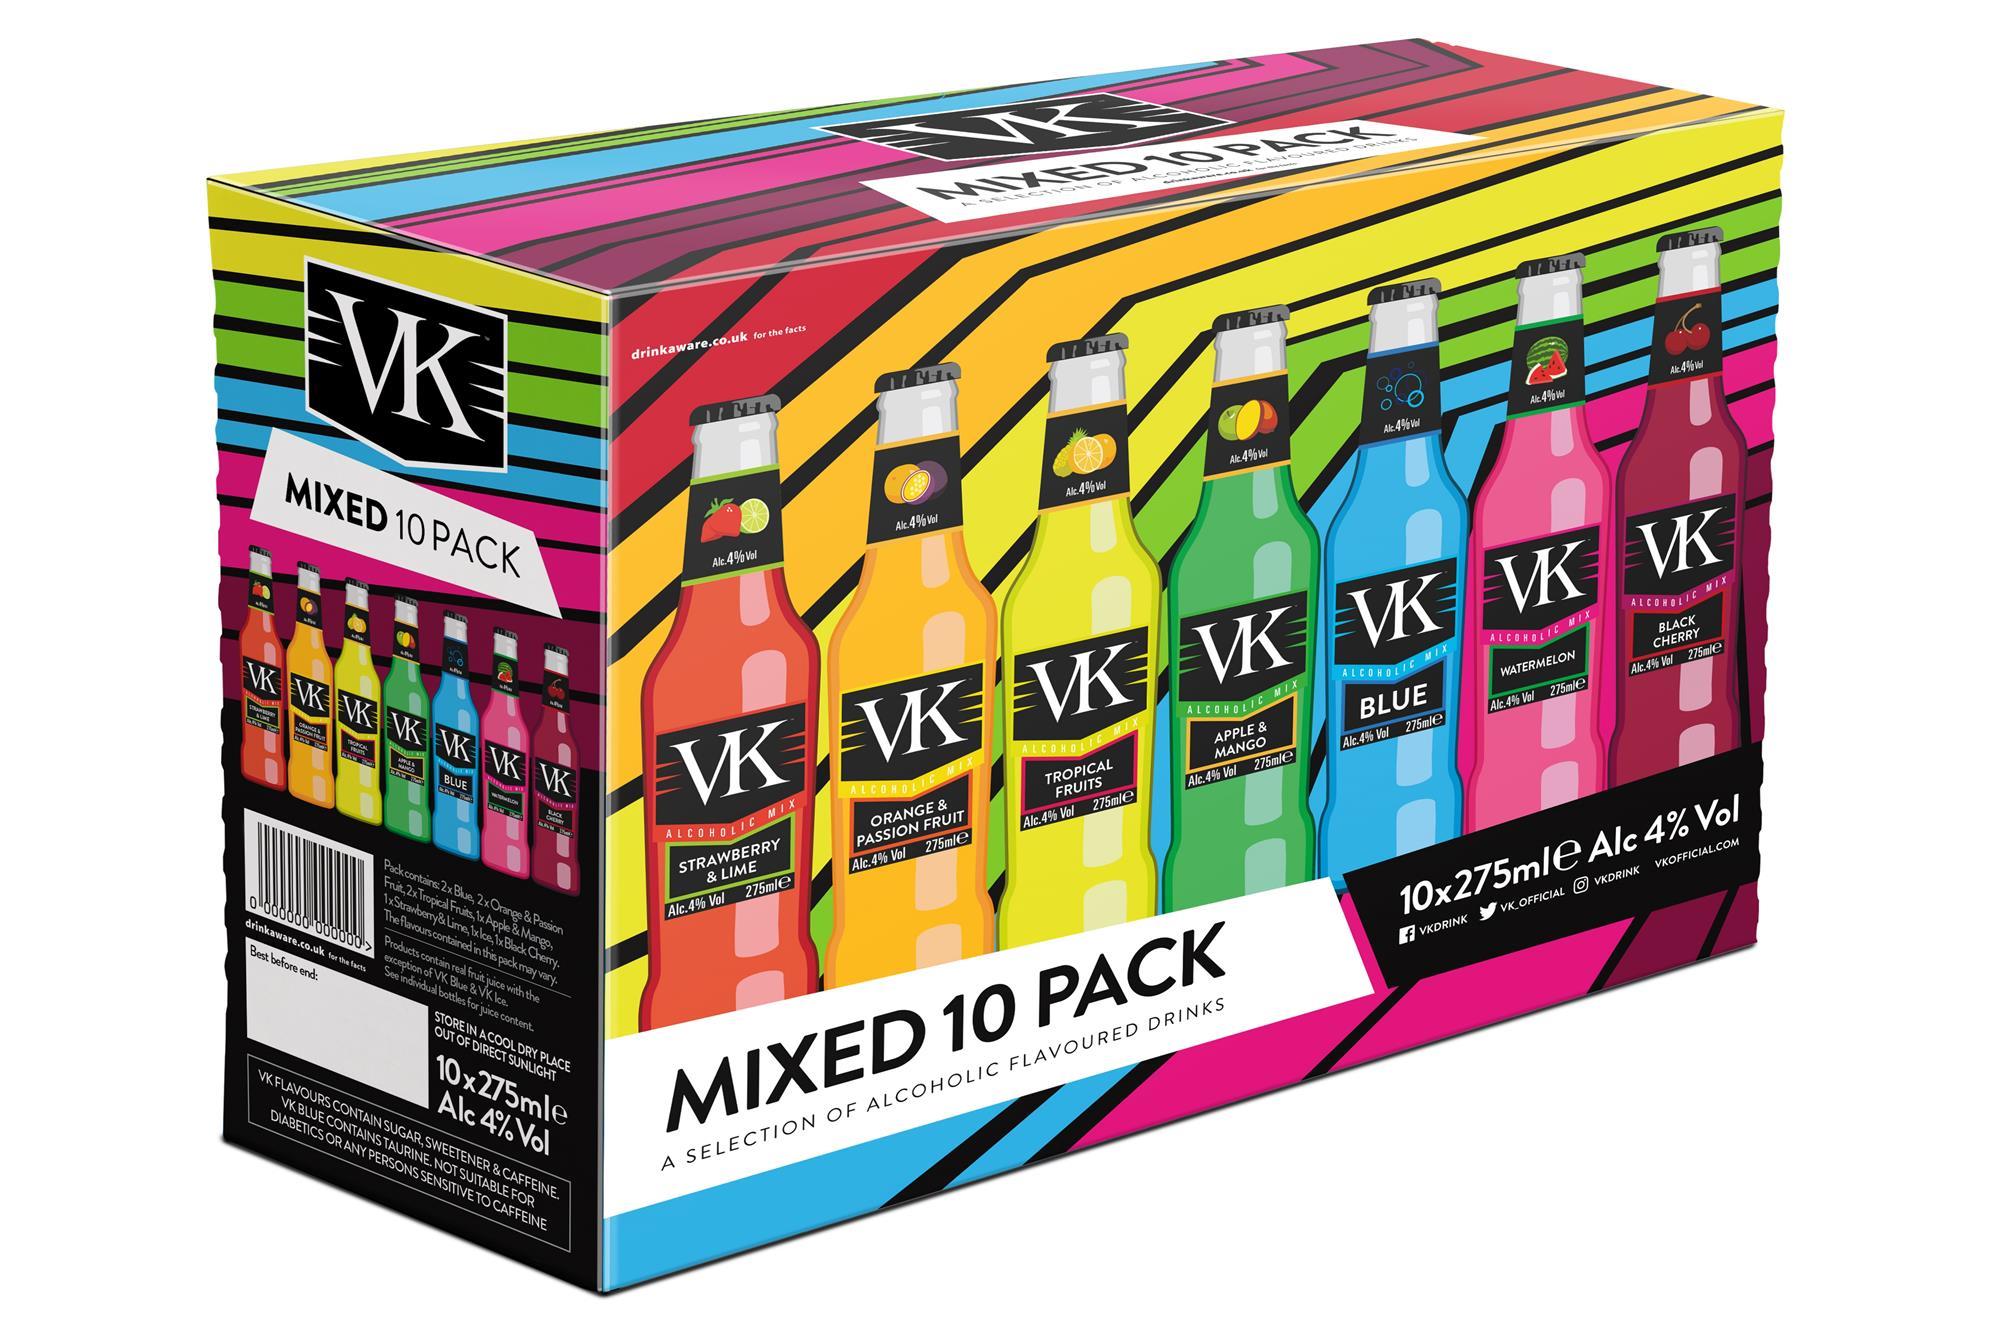 VK announces mixed pack revamp Product News Convenience Store